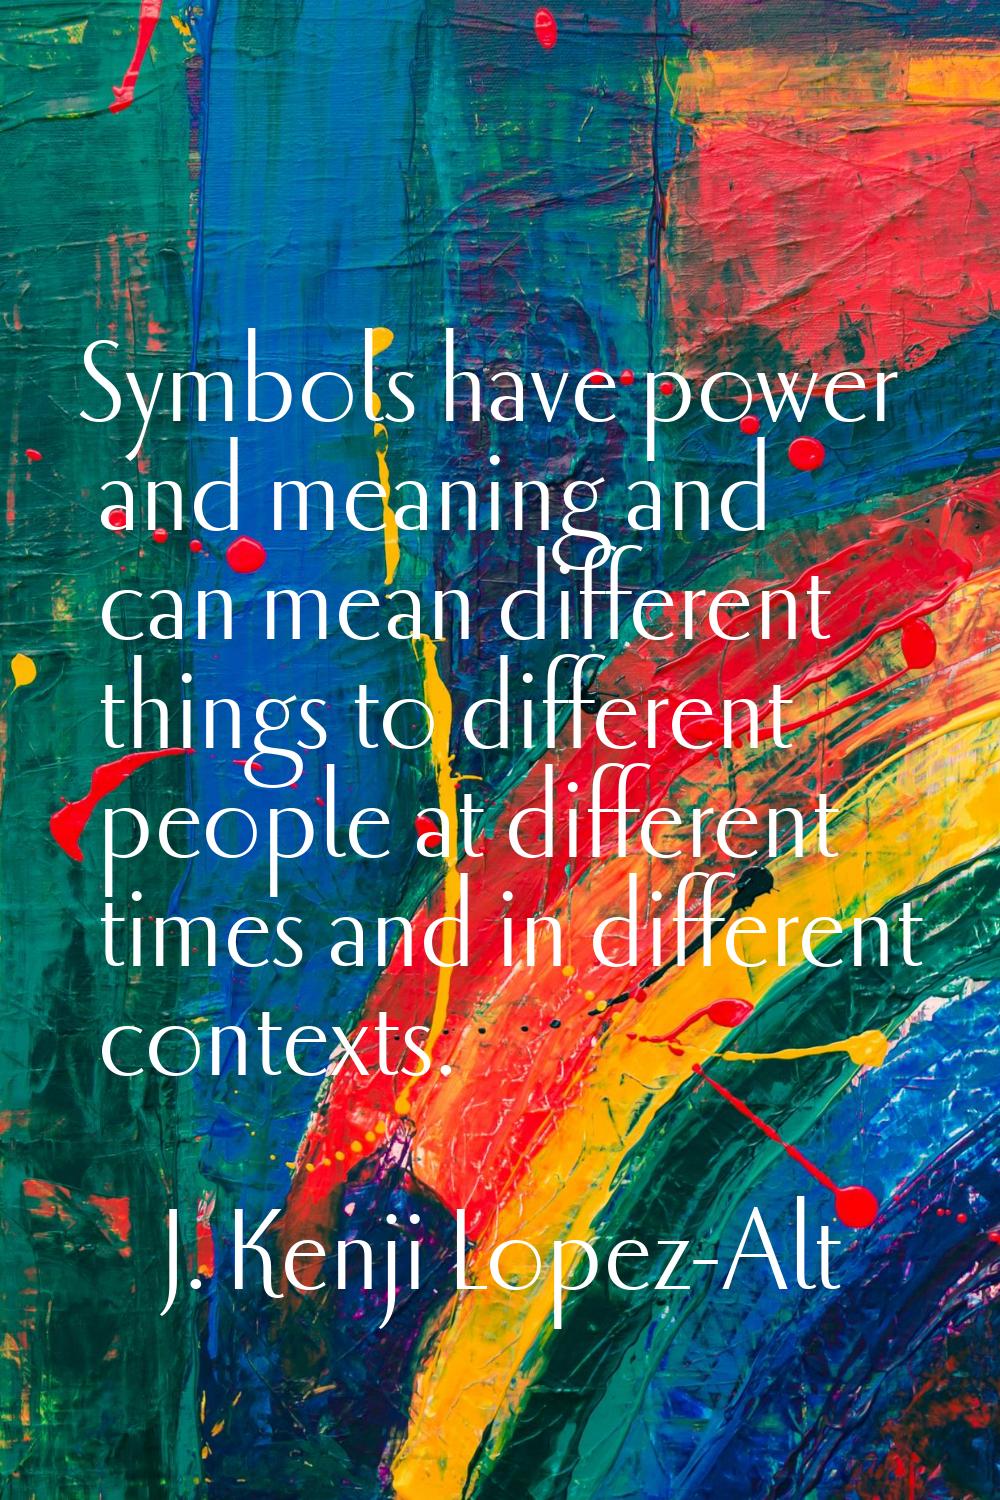 Symbols have power and meaning and can mean different things to different people at different times